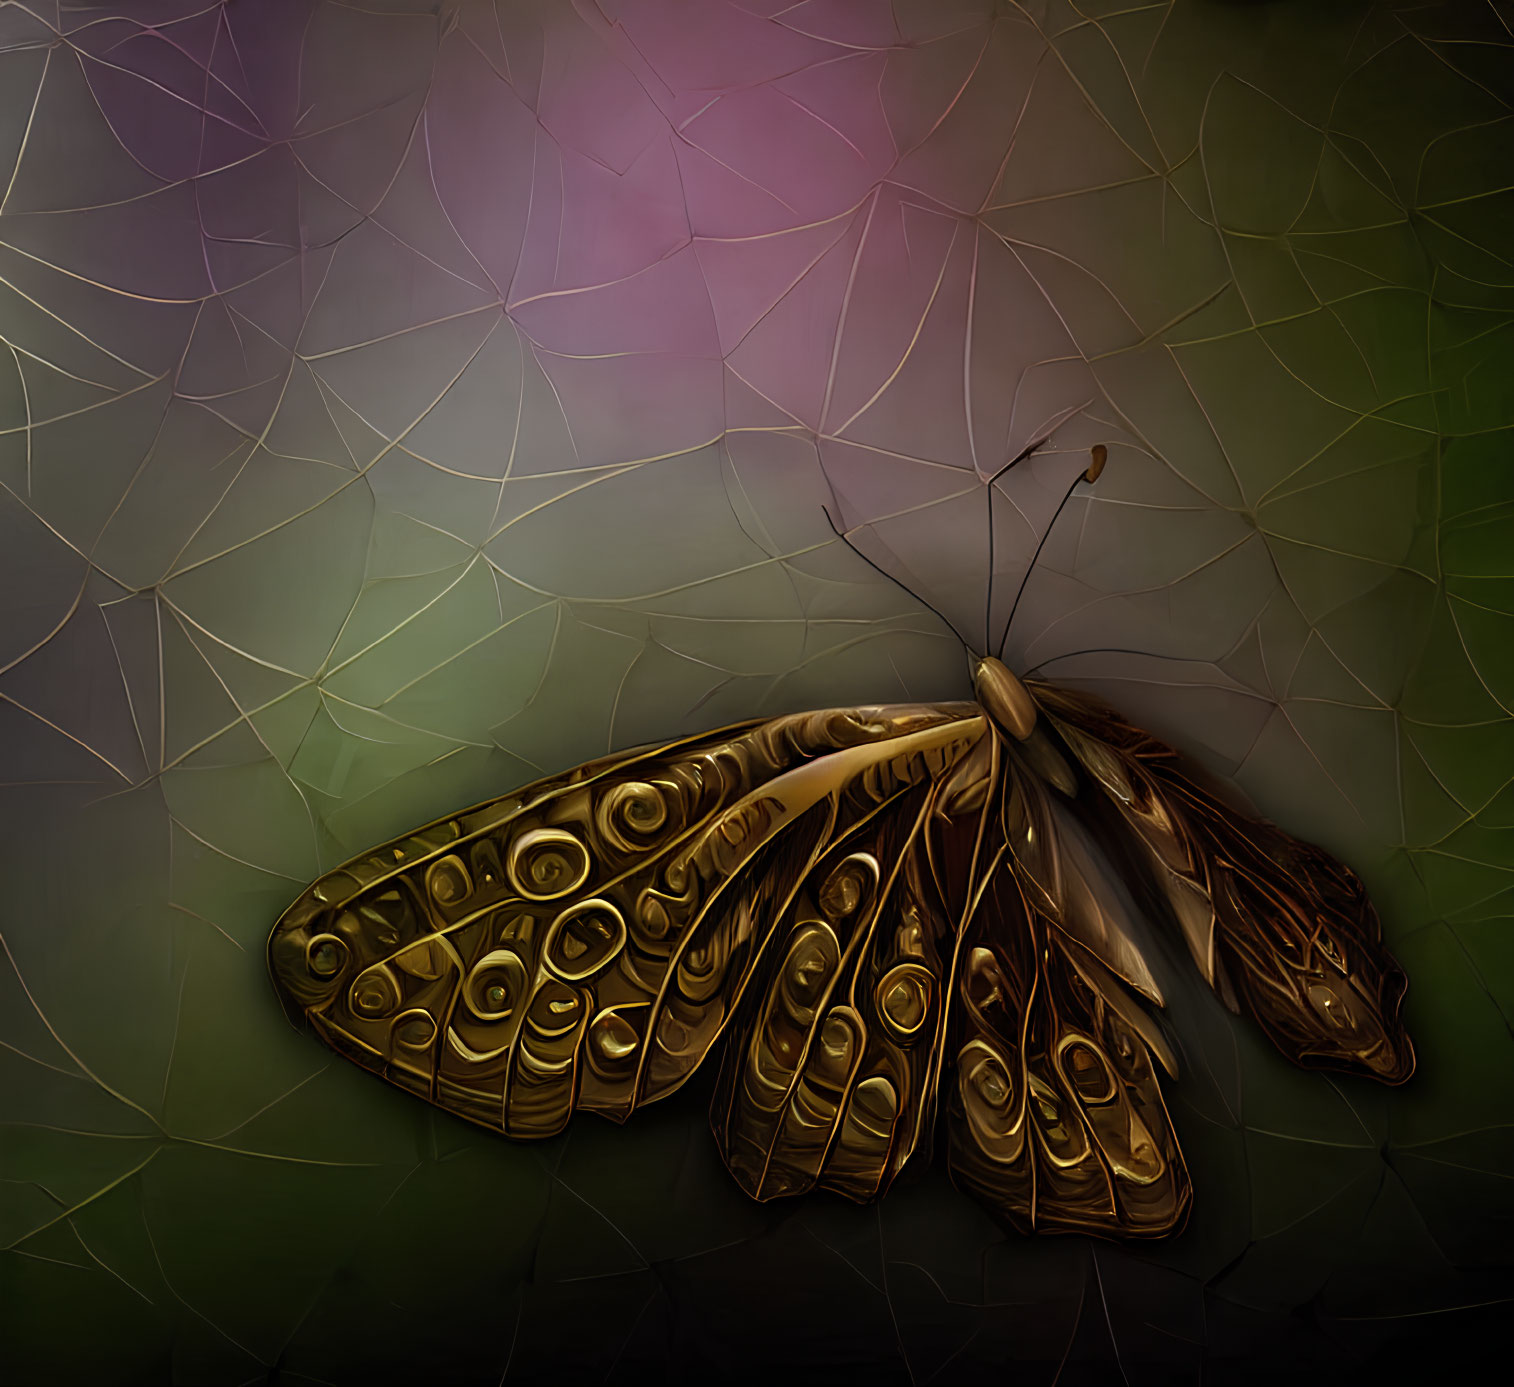 Digitally created butterfly with intricate wing patterns on multicolored background